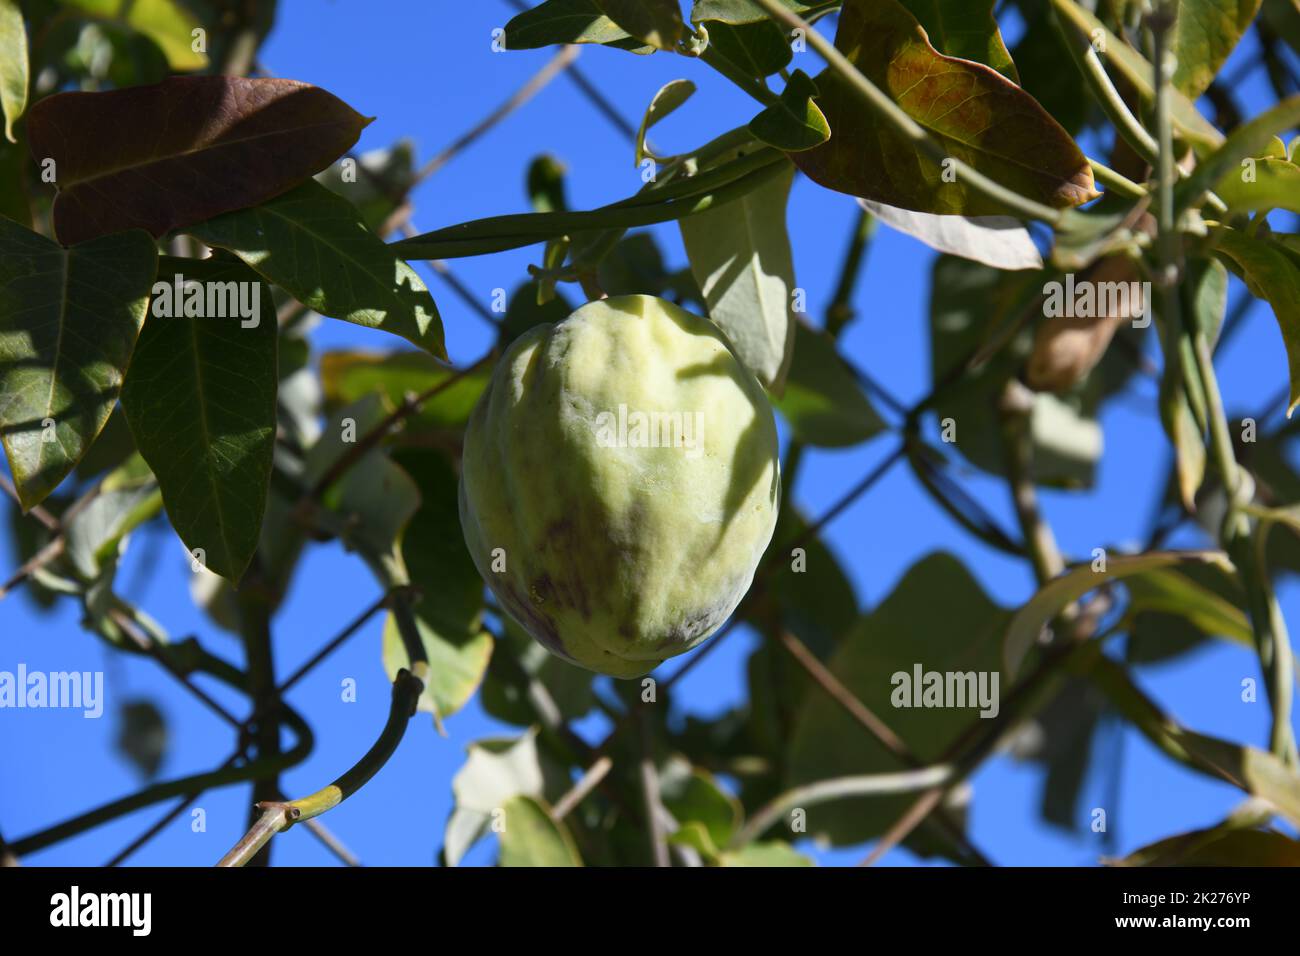 the fruit of chayote on a tree in Alicante province, Spain Stock Photo